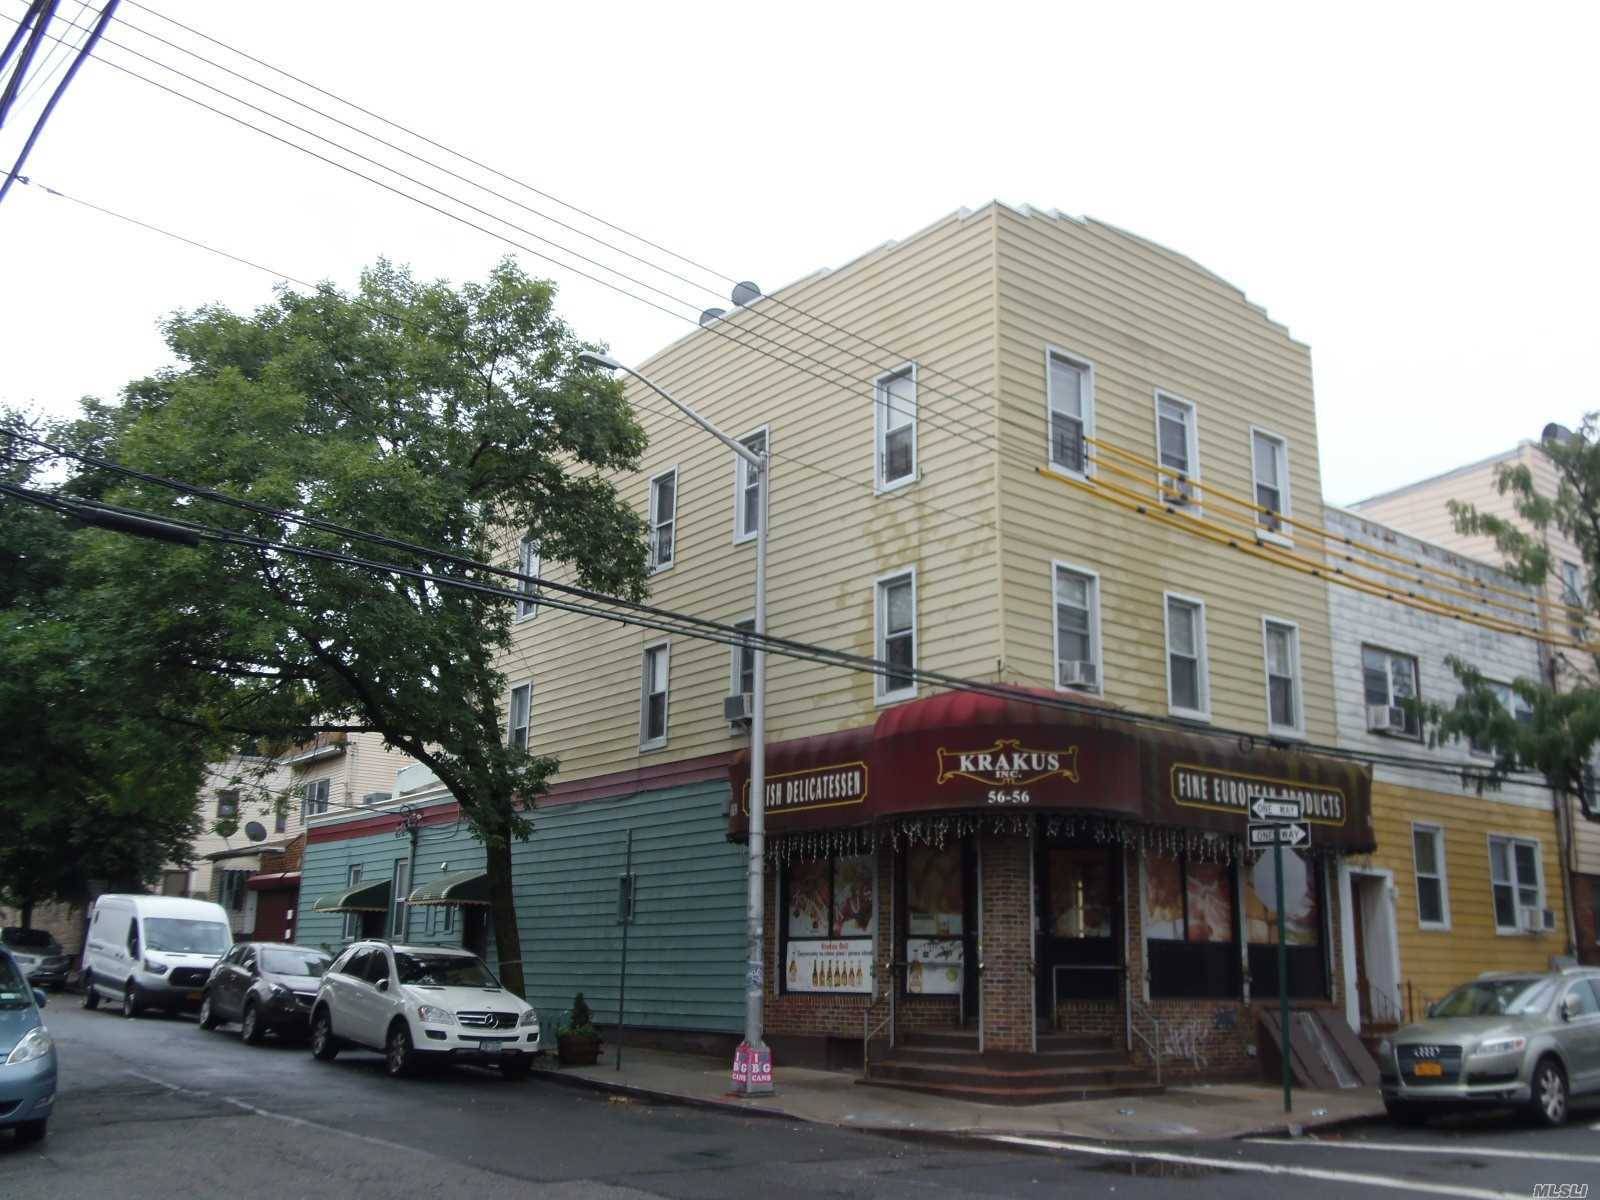 Great Investment Opportunity, A Mixed-Use Property With A Well-Known Store And Two Huge Apartments.